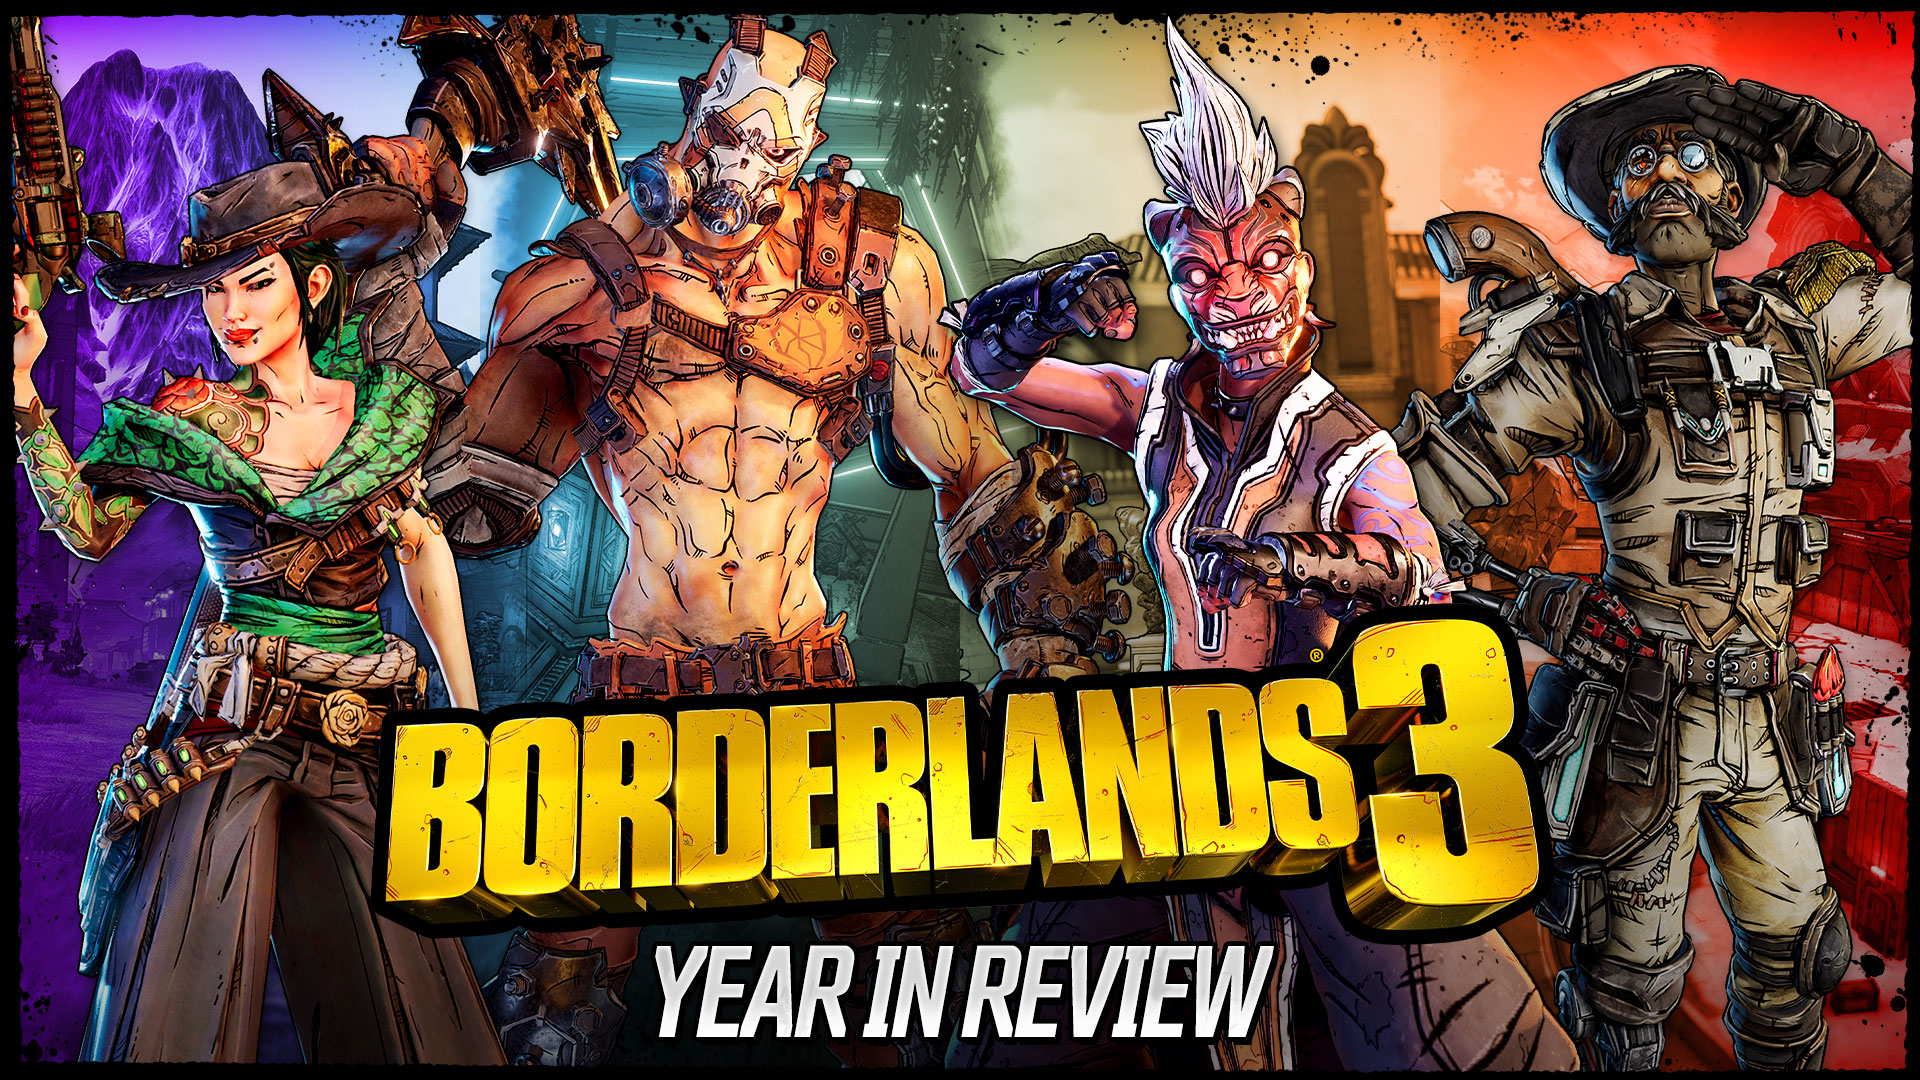 It's a good time to get back into 'Borderlands 3".